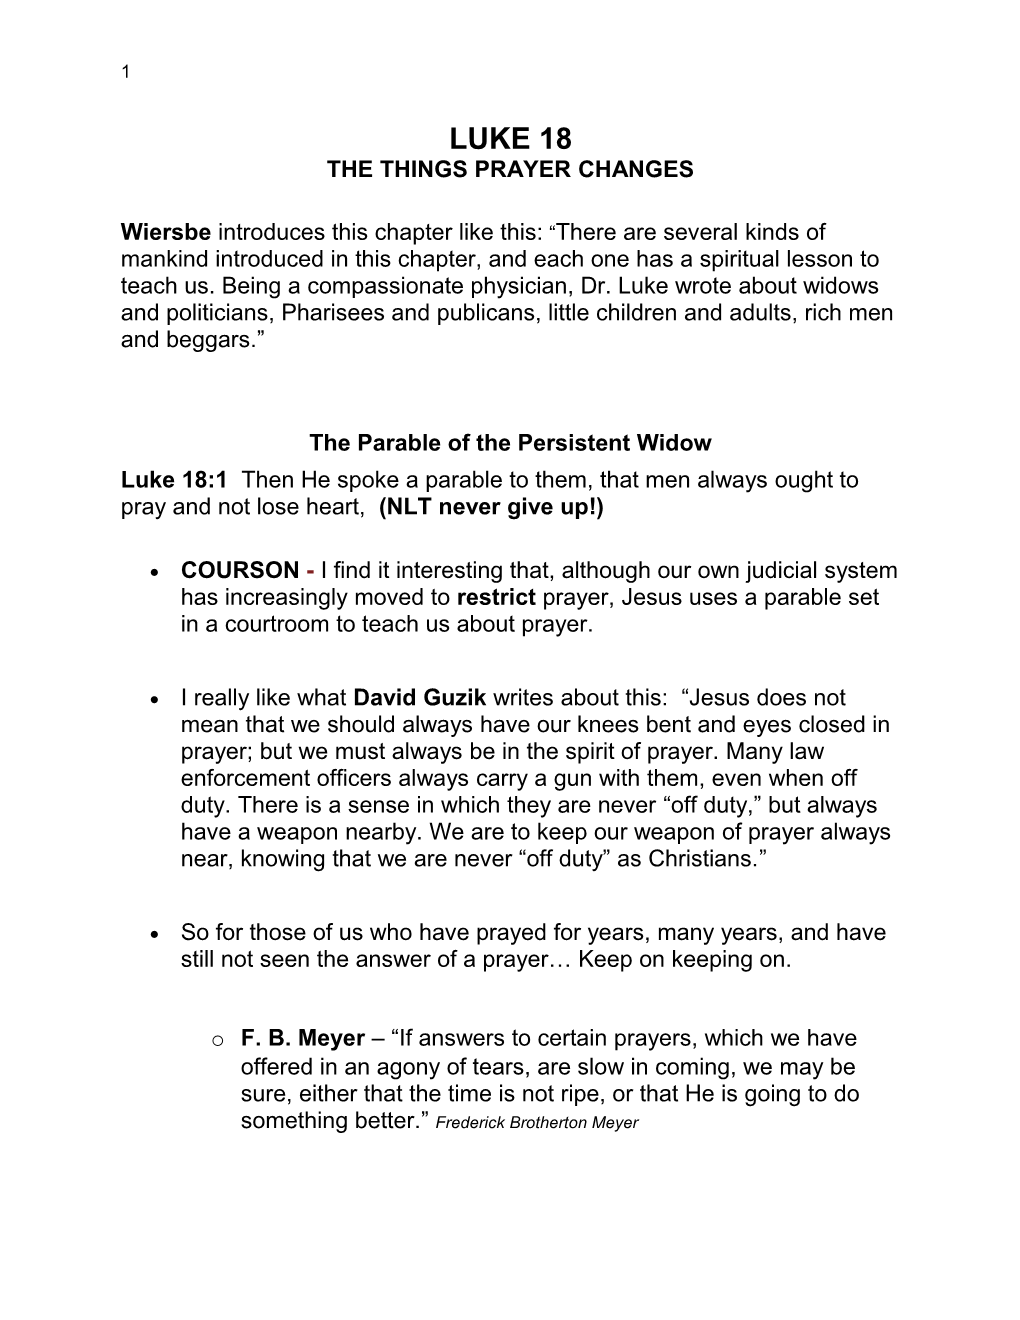 The Things Prayer Changes